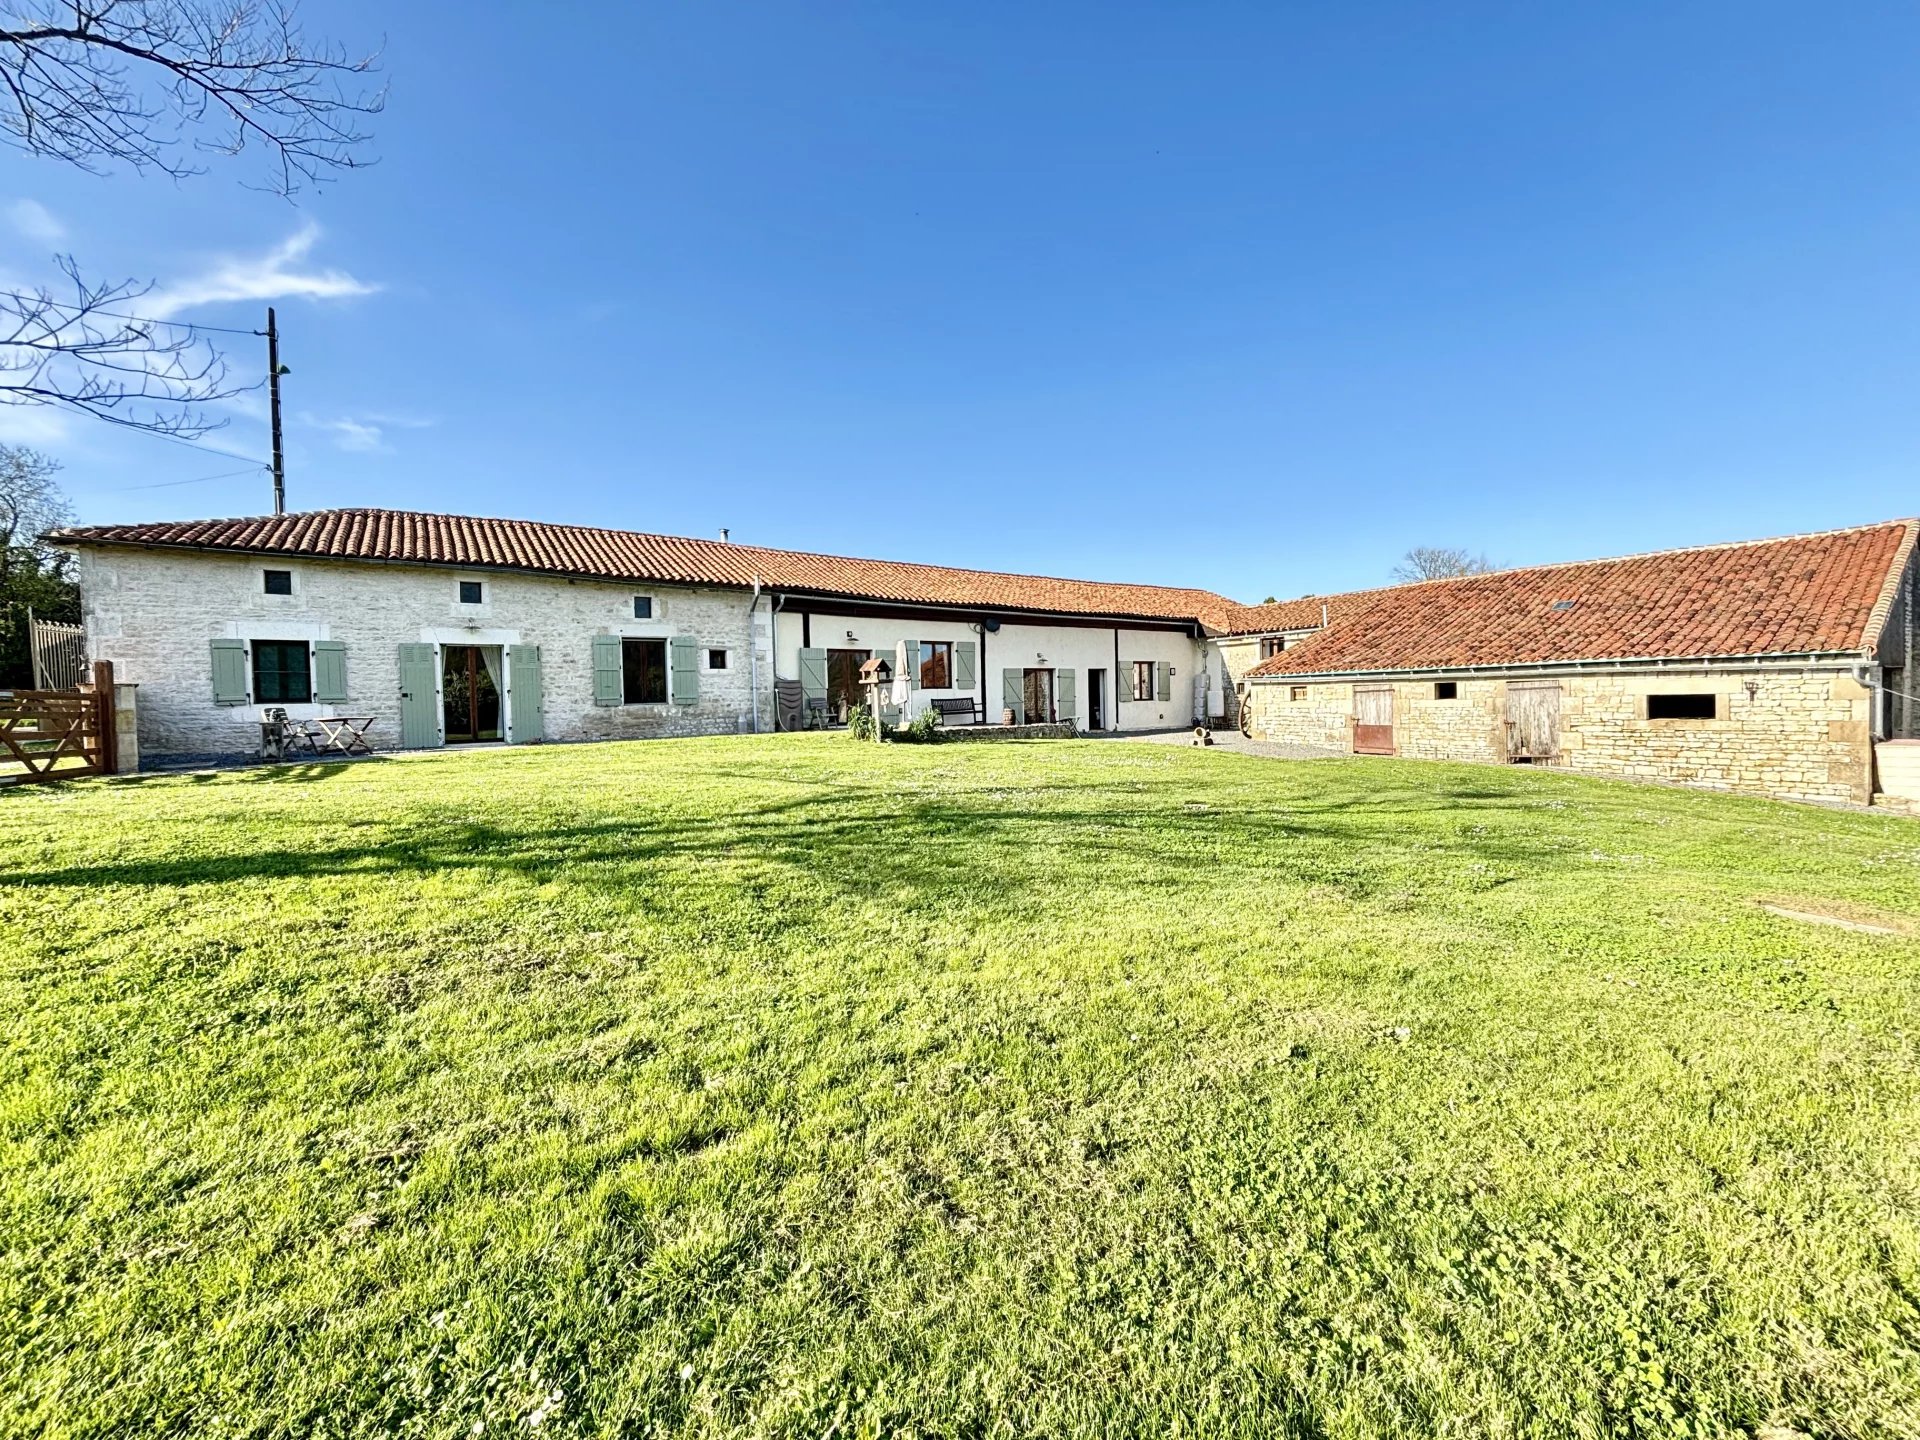 Spacious country home with fantastic living space, views, 2 barns and approx 1.5 acres of attached land